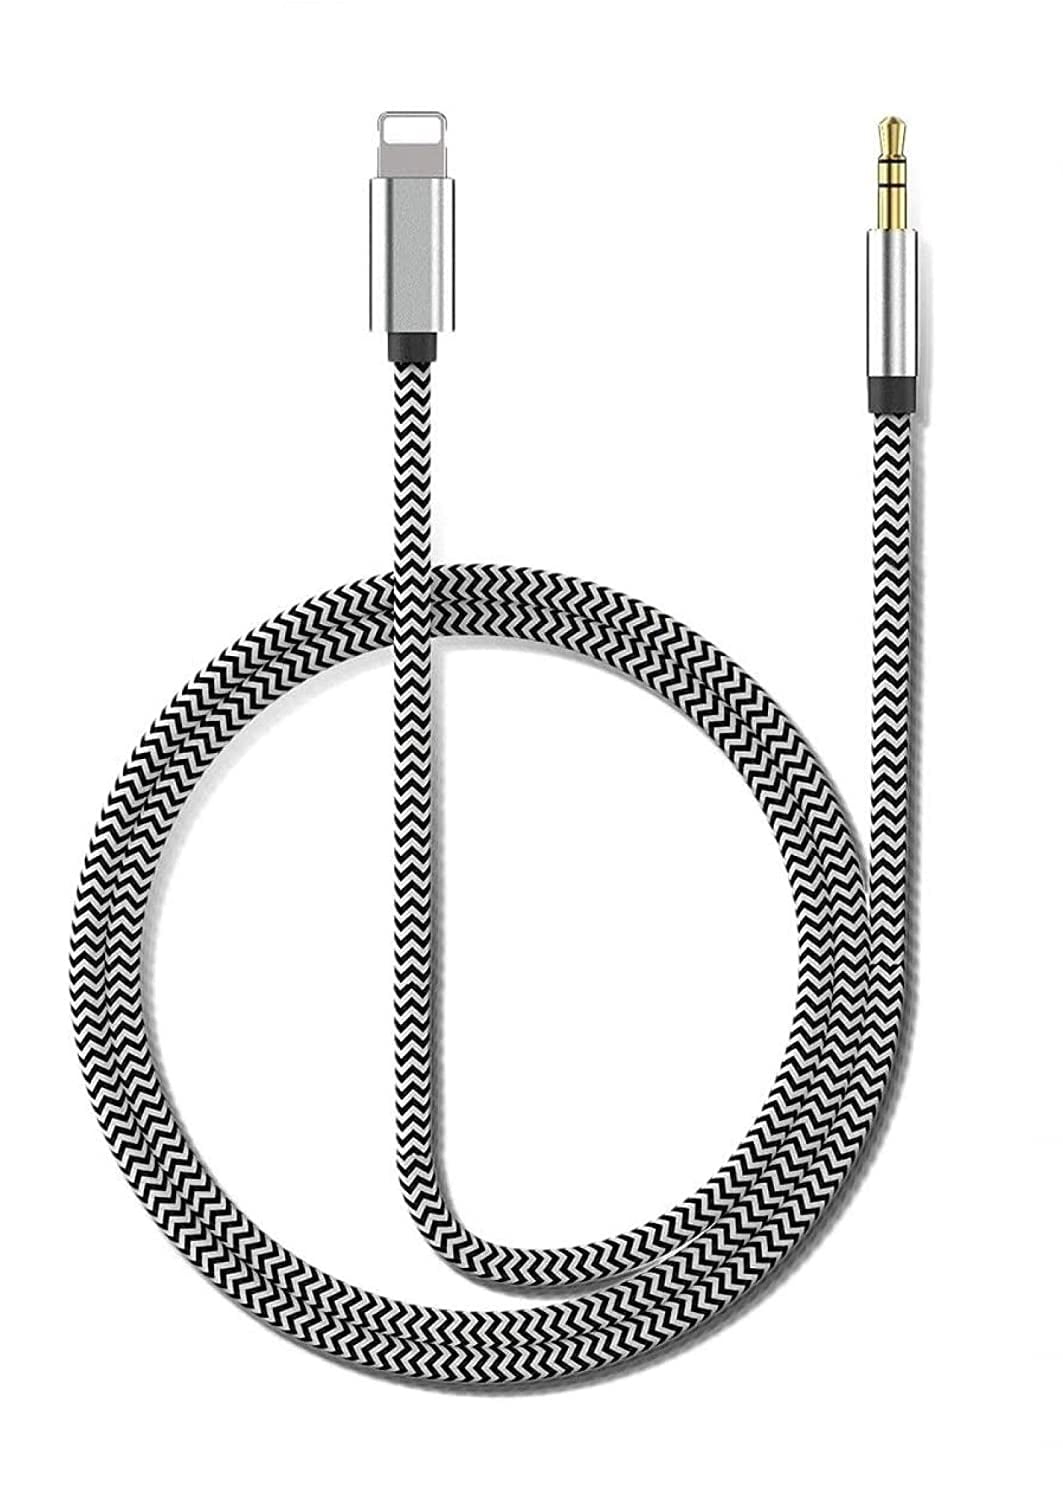 Apple MFi Certified Aux Cord for iPhone,Lightning to 3.5mm Nylon Braided AUX Audio Music Cable Car Cord for iPhone 12/11 Pro/XS/XR/X 8 7/iPad/iPod to Car/Home Stereo,Speaker,Headphone 3.3FT,Silver 